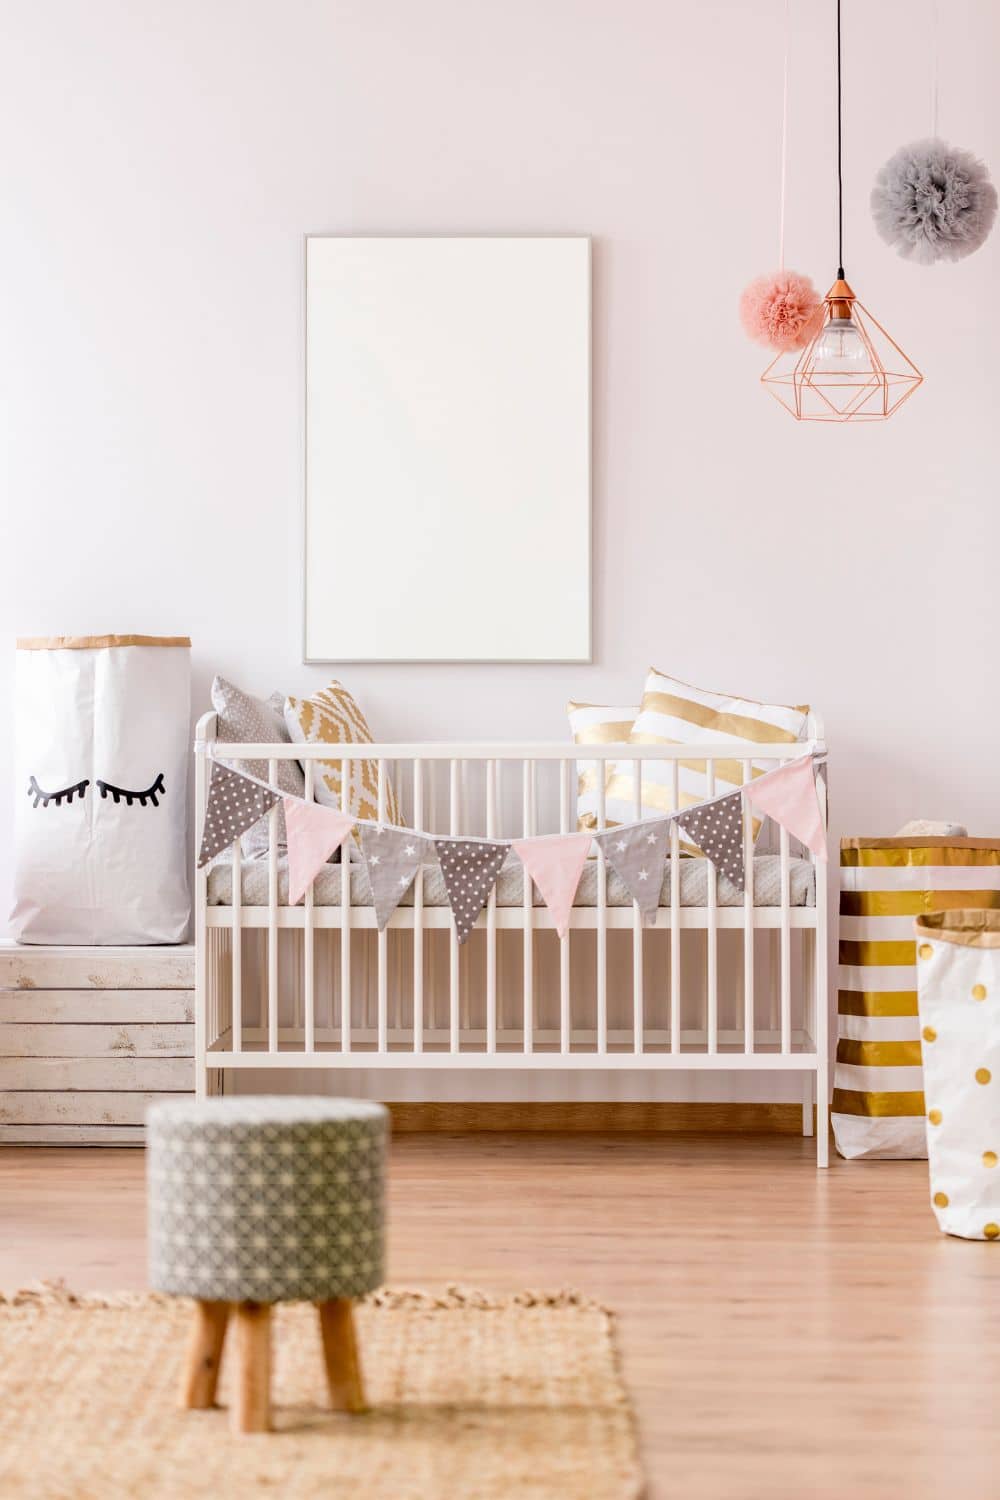 Tips for Preparing a Nursery On a Budget